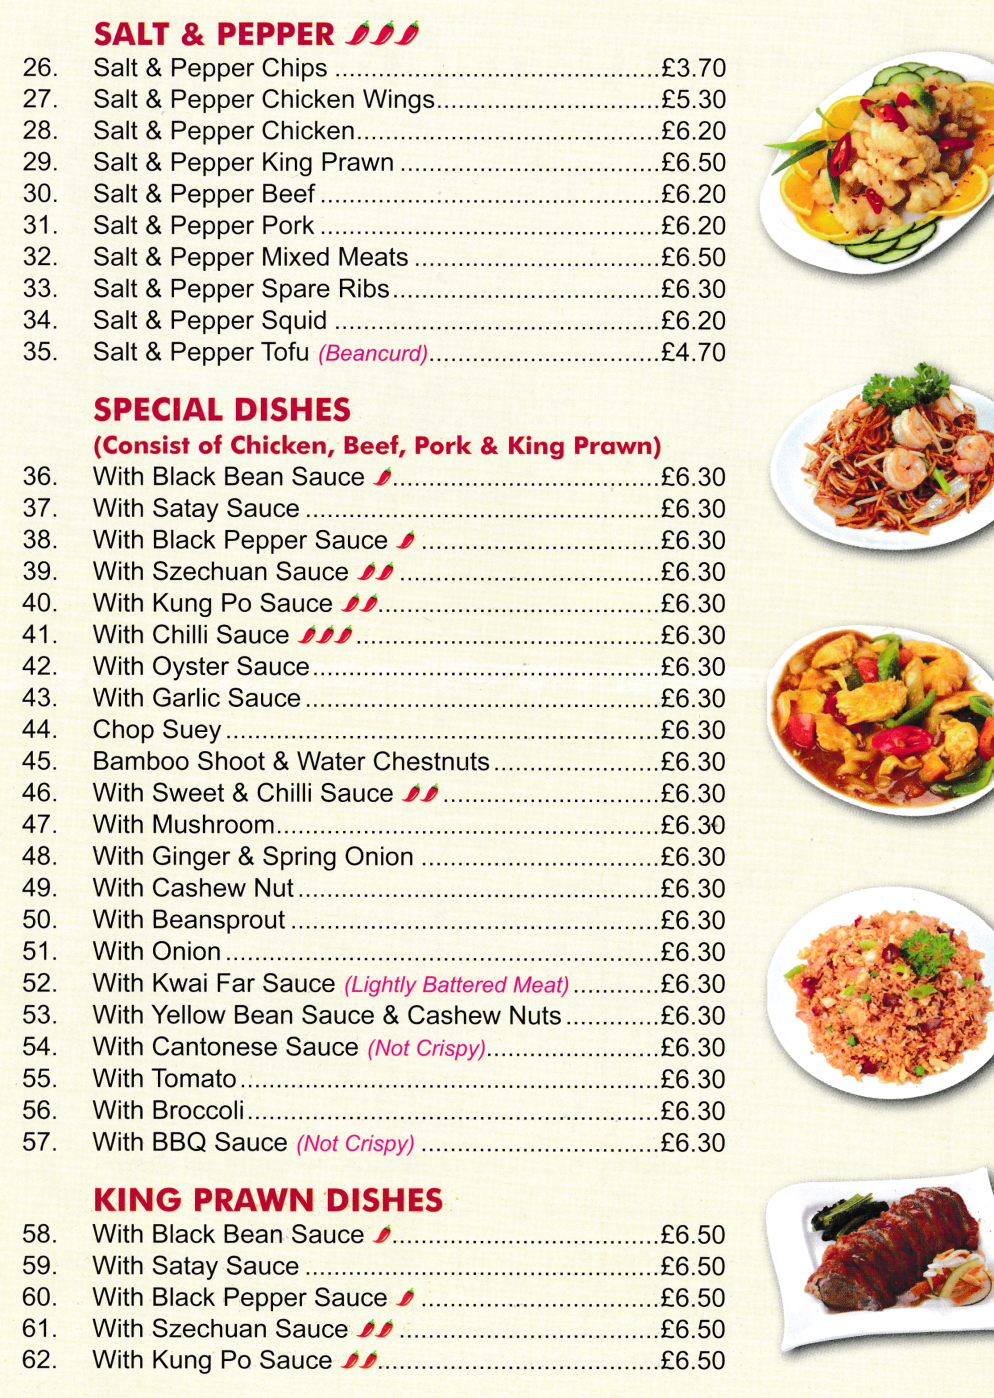 Menu for G&N's Kitchen - Salt & Pepper Squid, King Prawn with Satay Sauce, G&N Special Dishes..